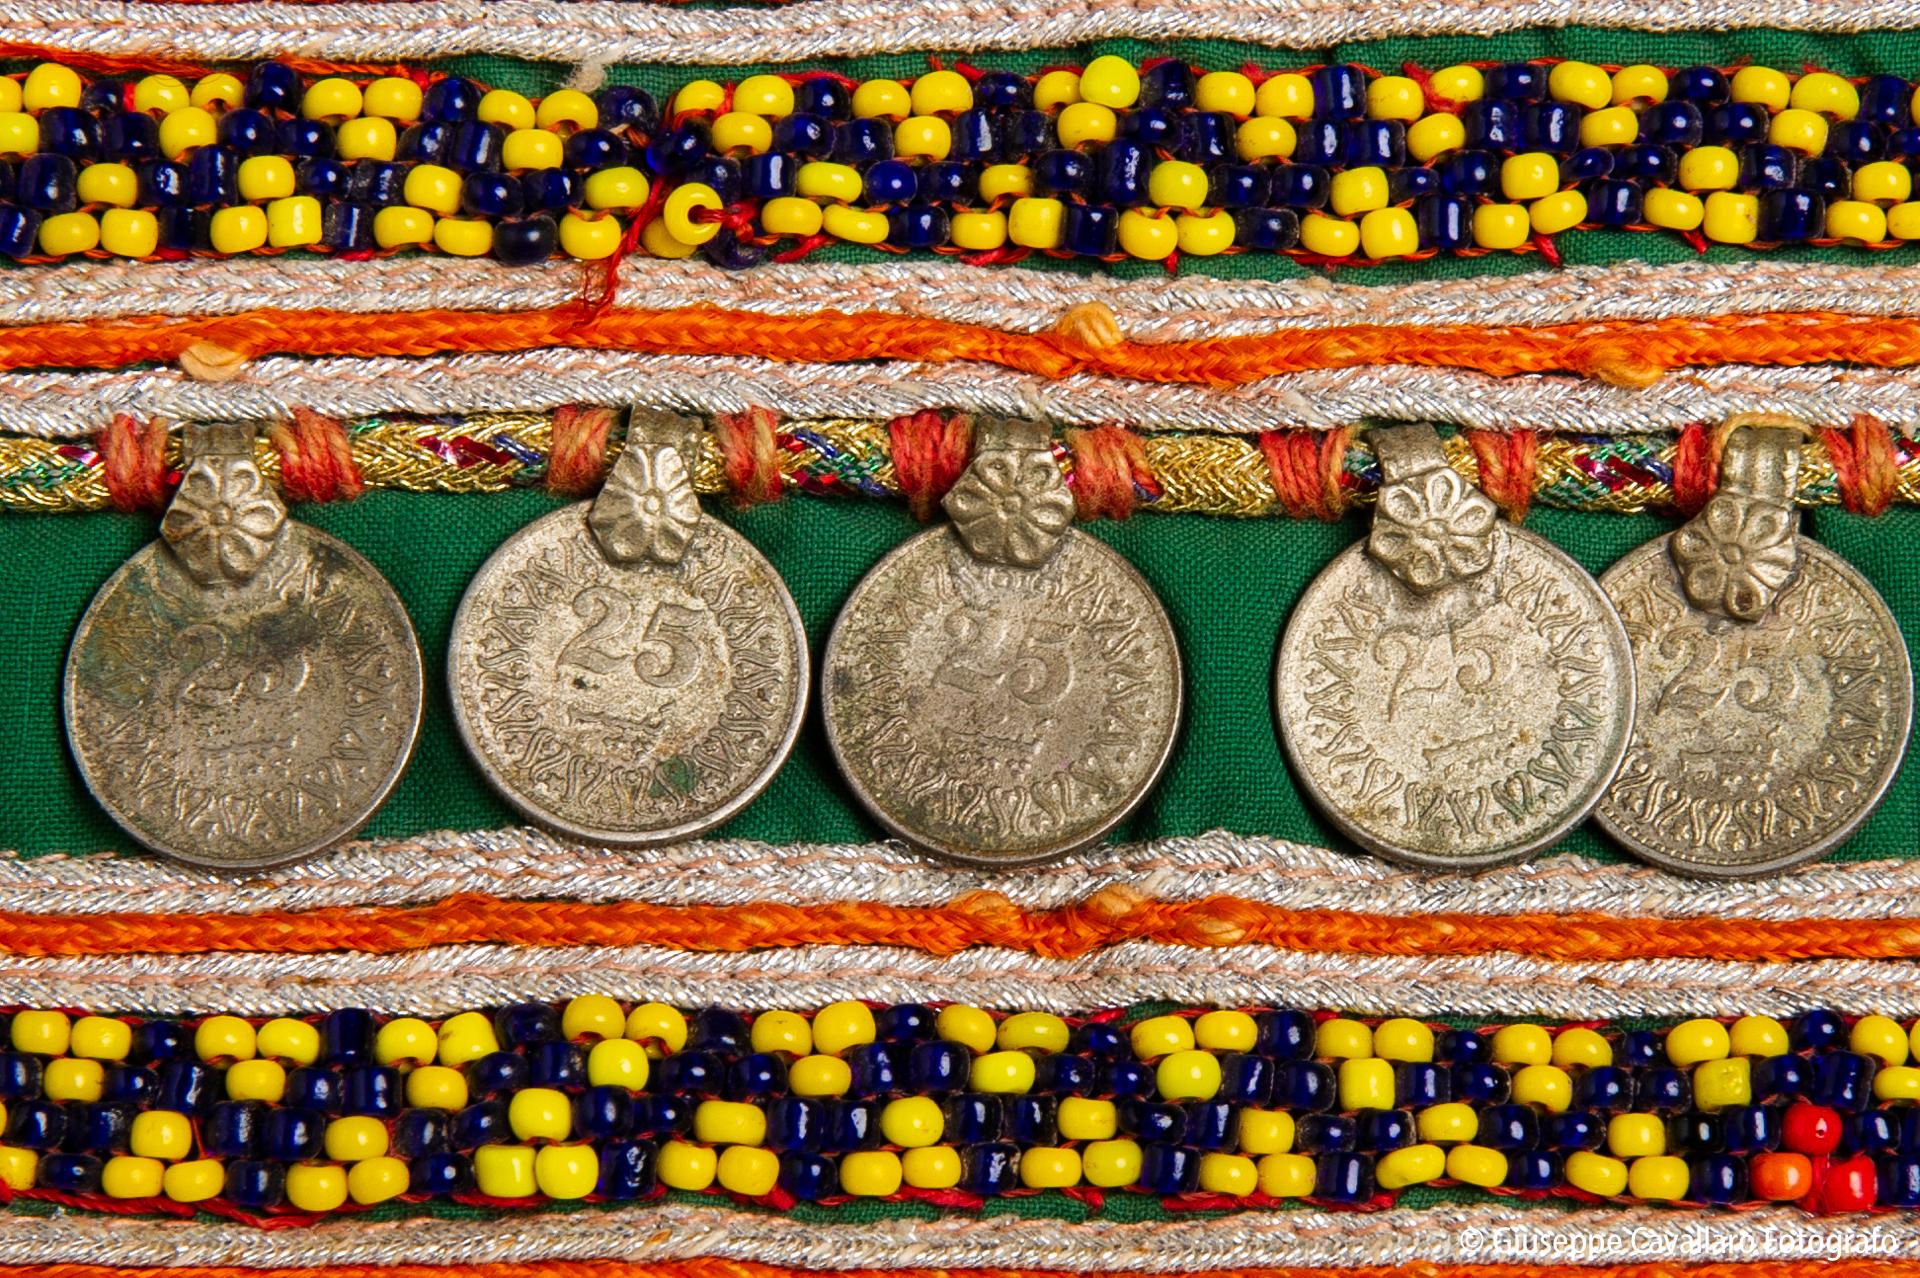 20th Century Old Afghan Belts with Ancient Coins, also as Curtain-holders